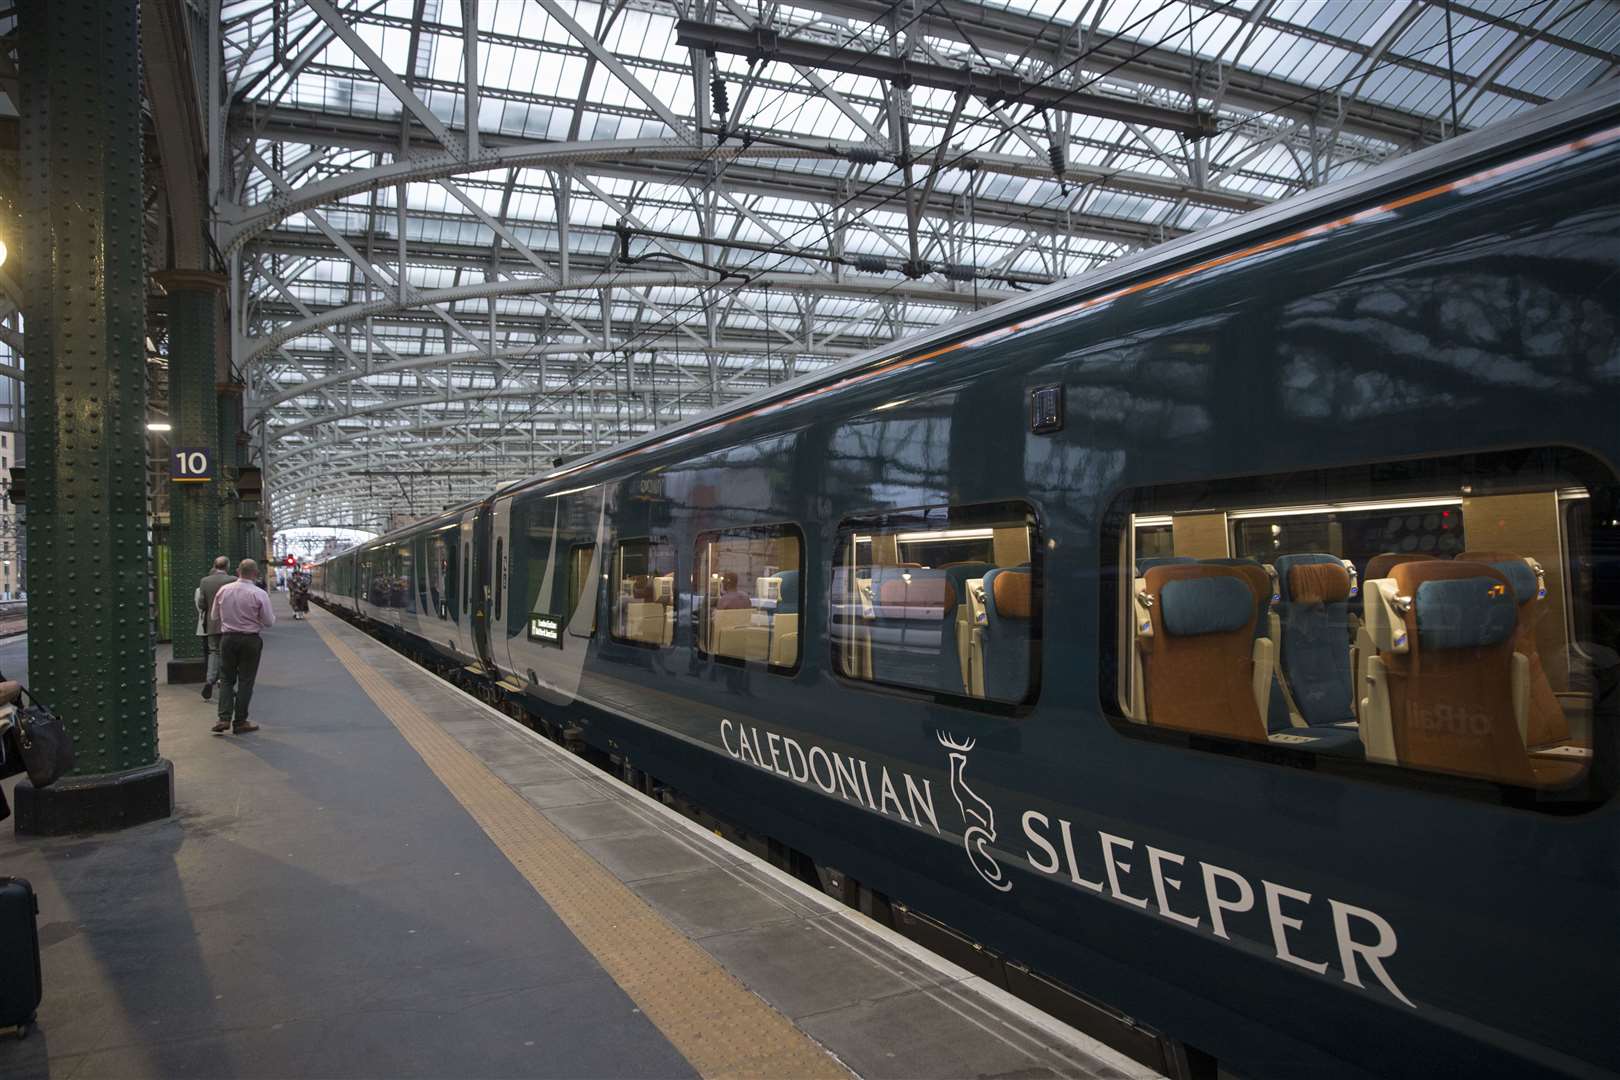 New carriages had been due to run on the Sleeper service from early next month.